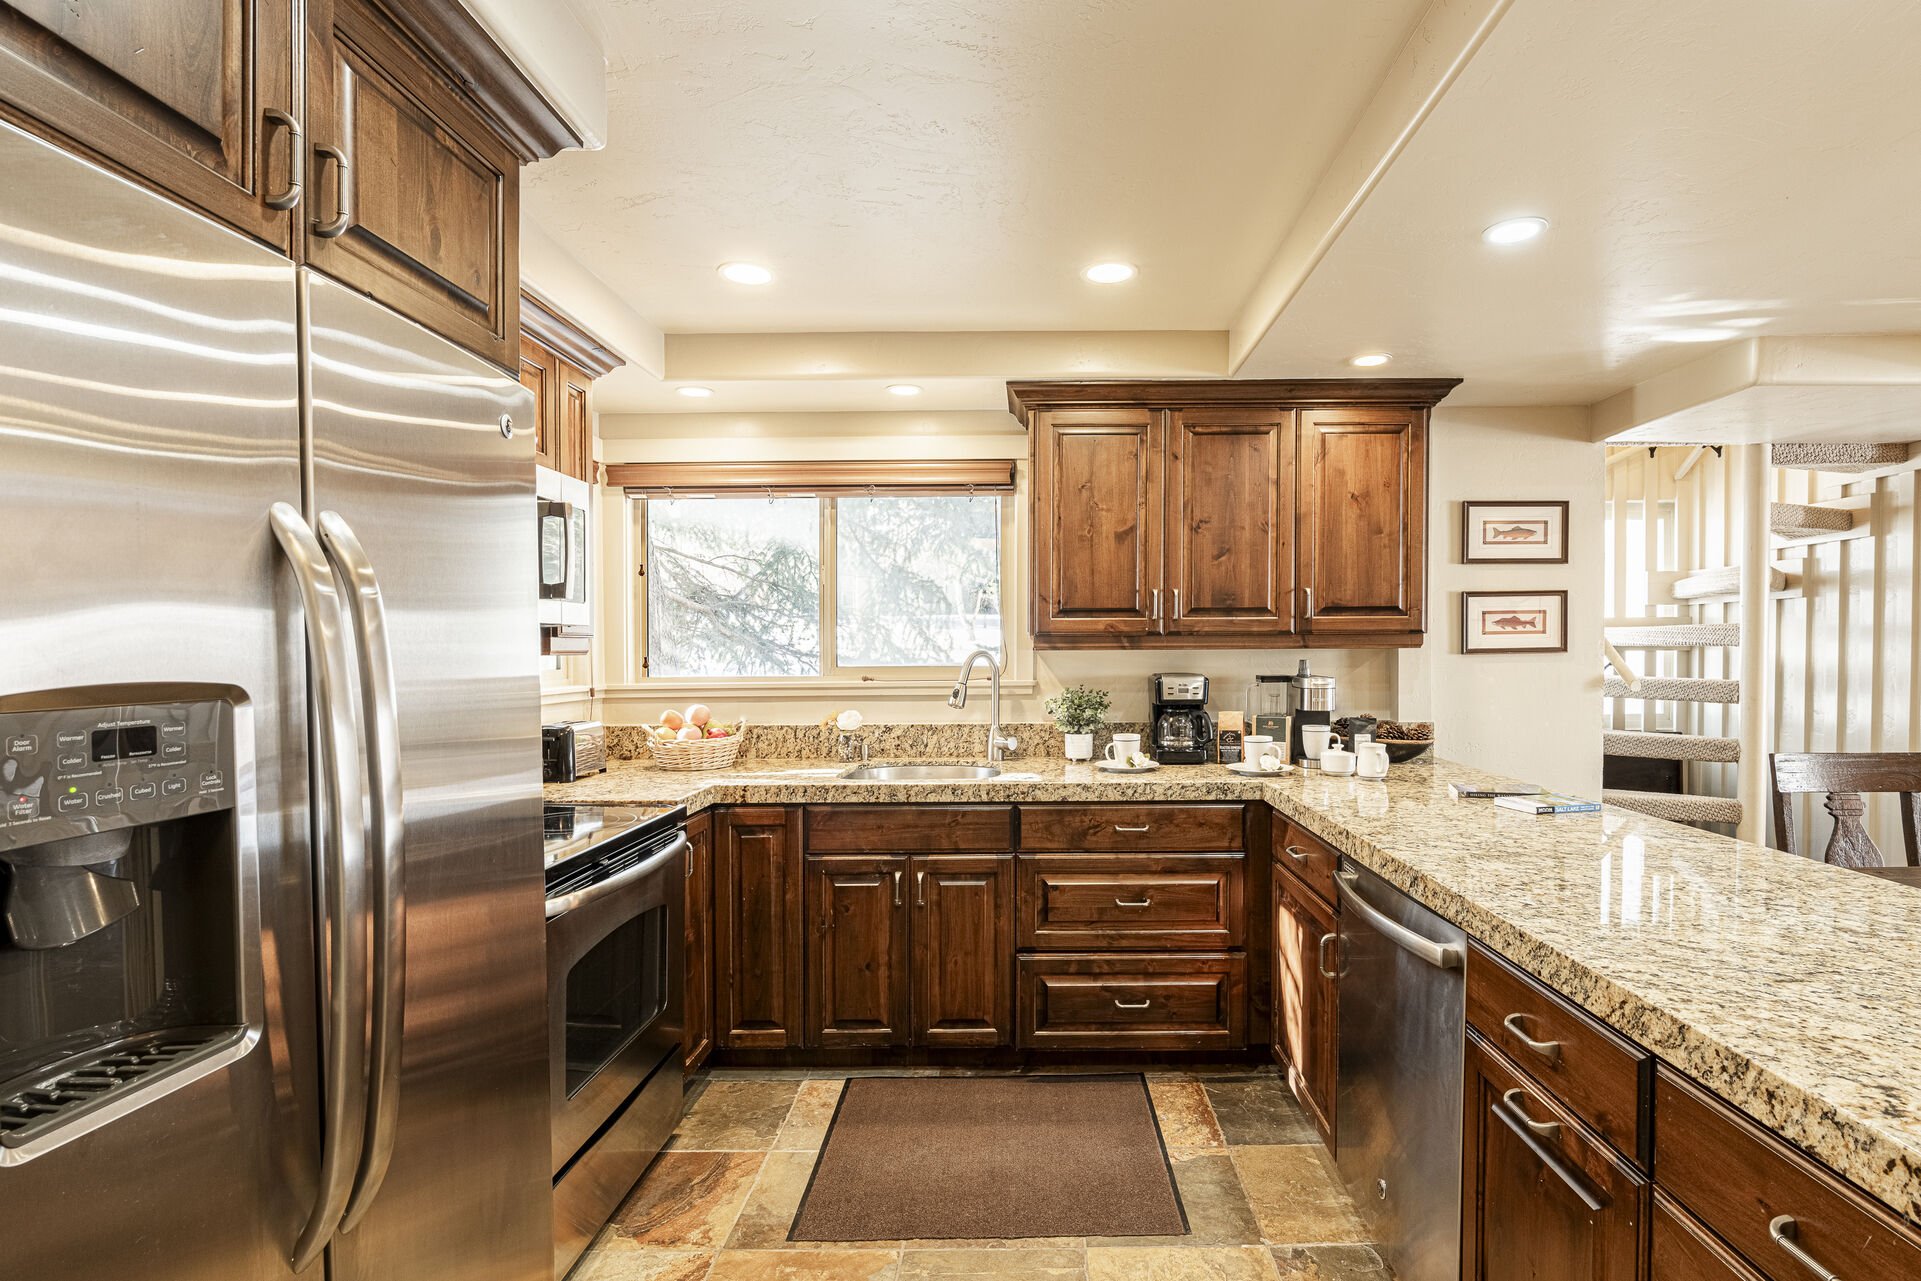 Kitchen with Stainless Steel Appliances, Granite Counters, and Electric Range